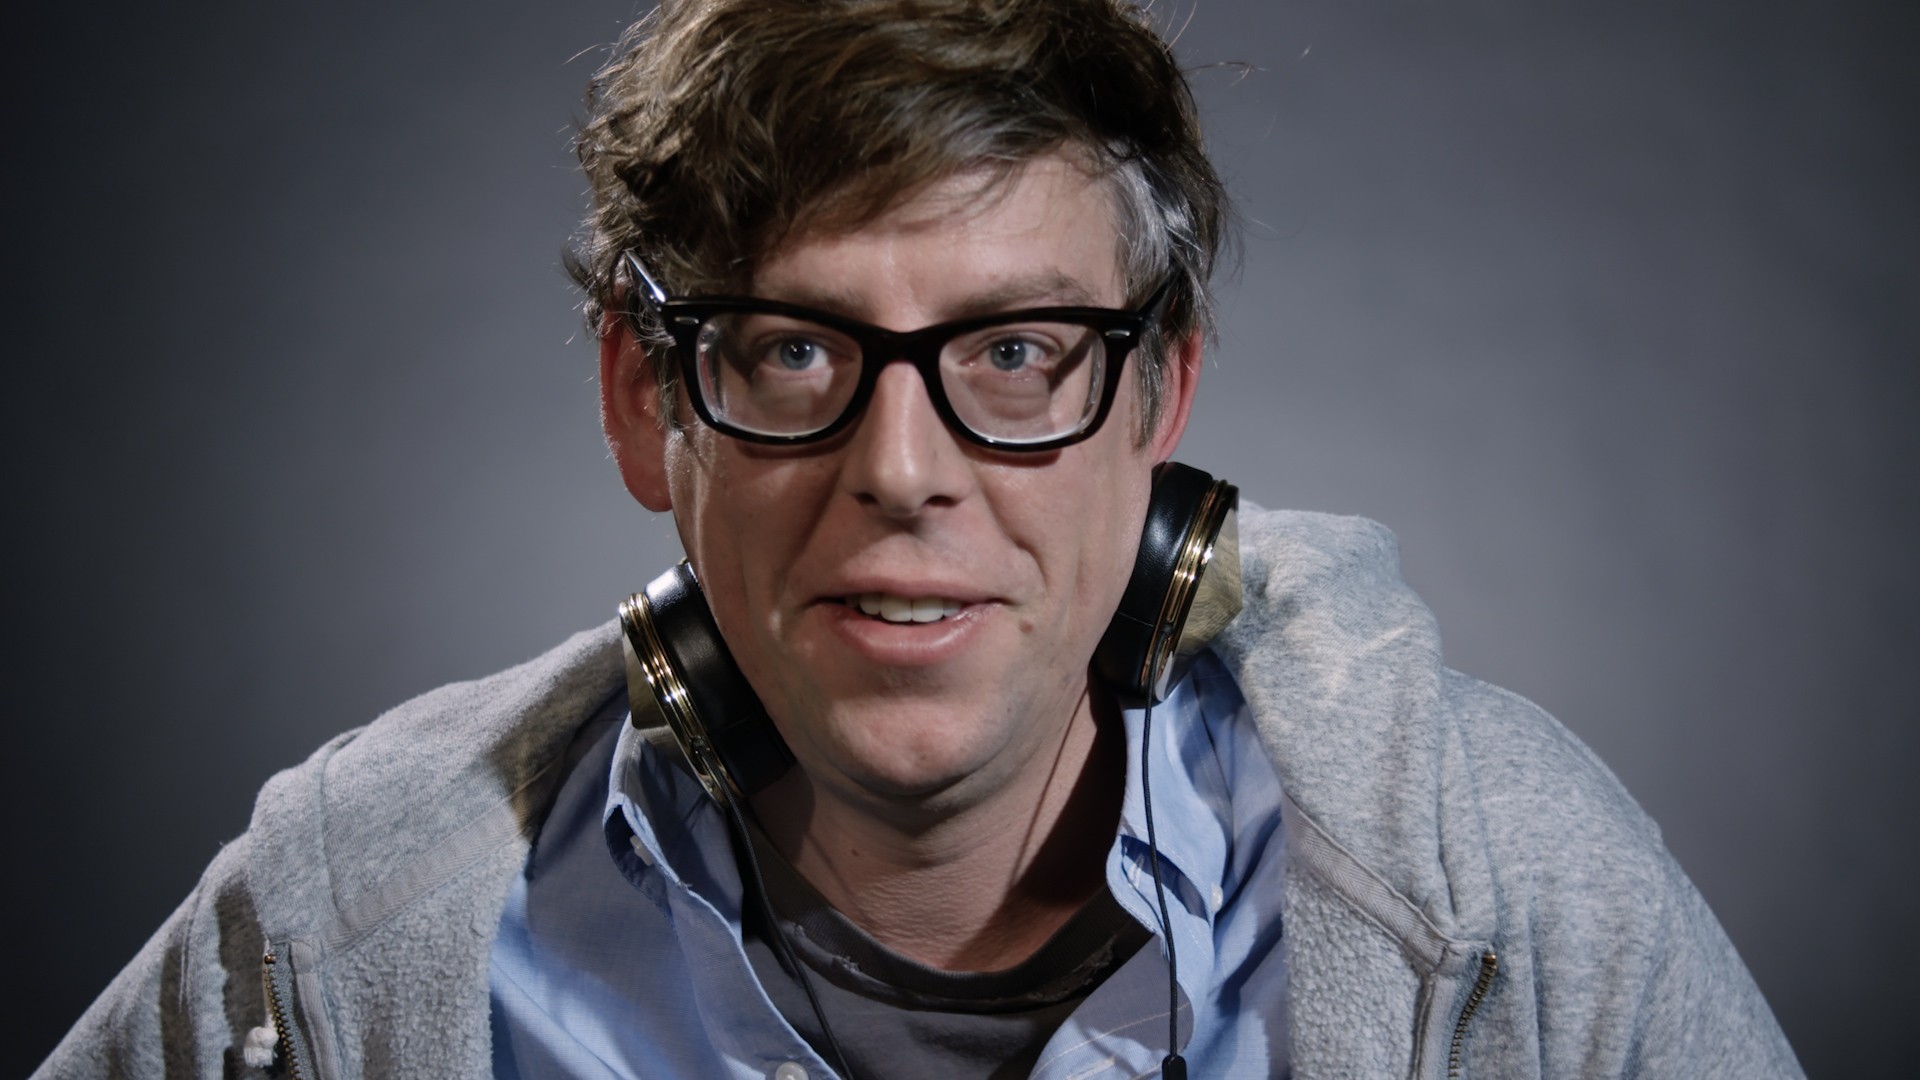 The Black Keys' Patrick Carney explains why people listen to country music